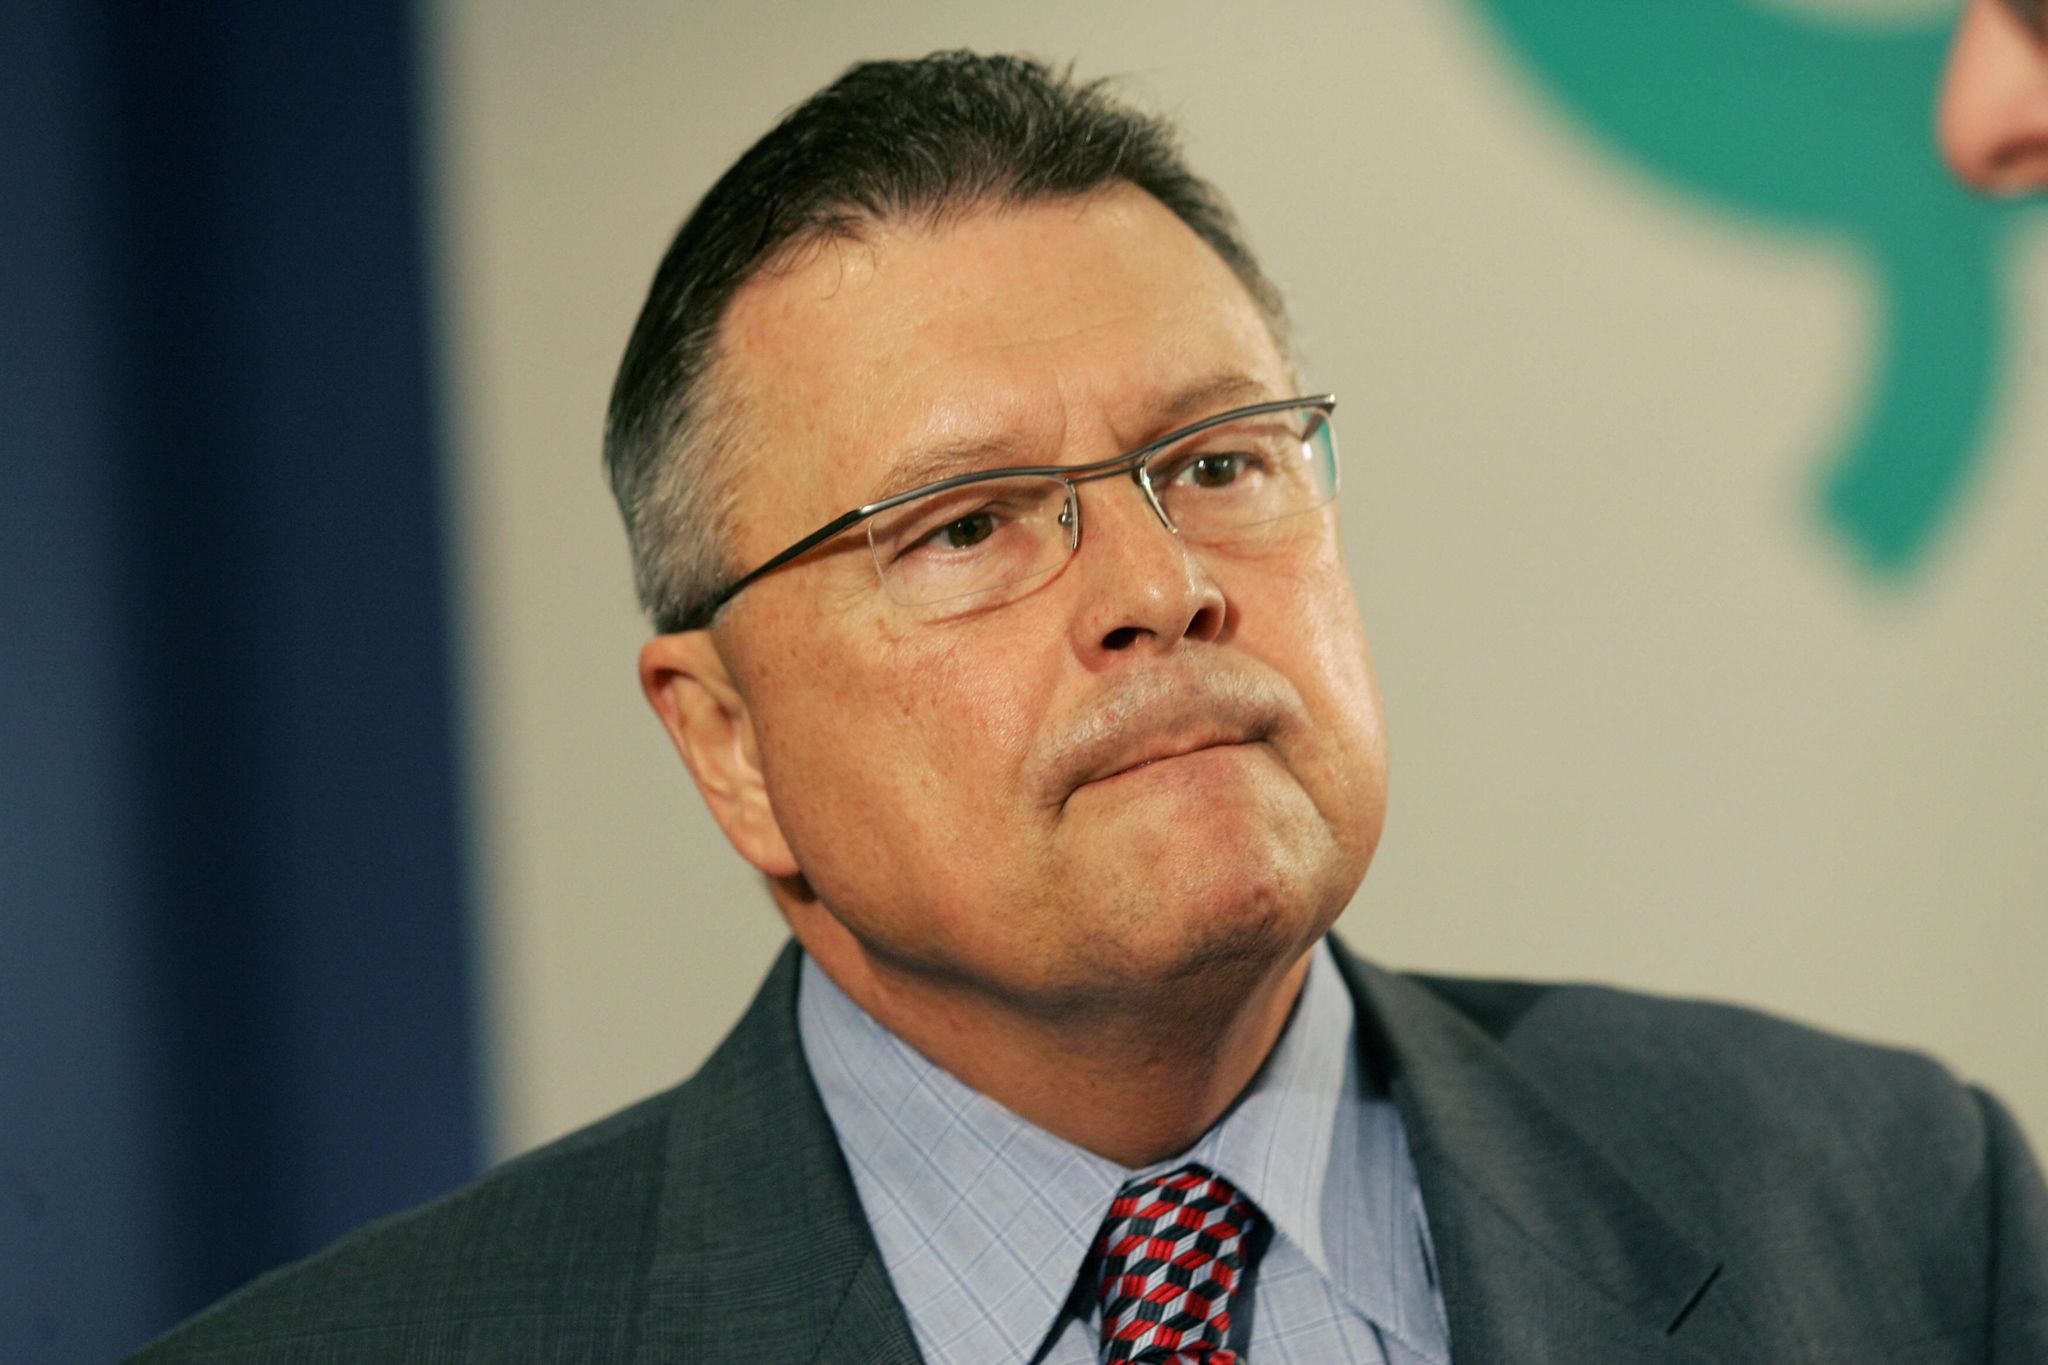 Canadian public safety minister Ralph Goodale